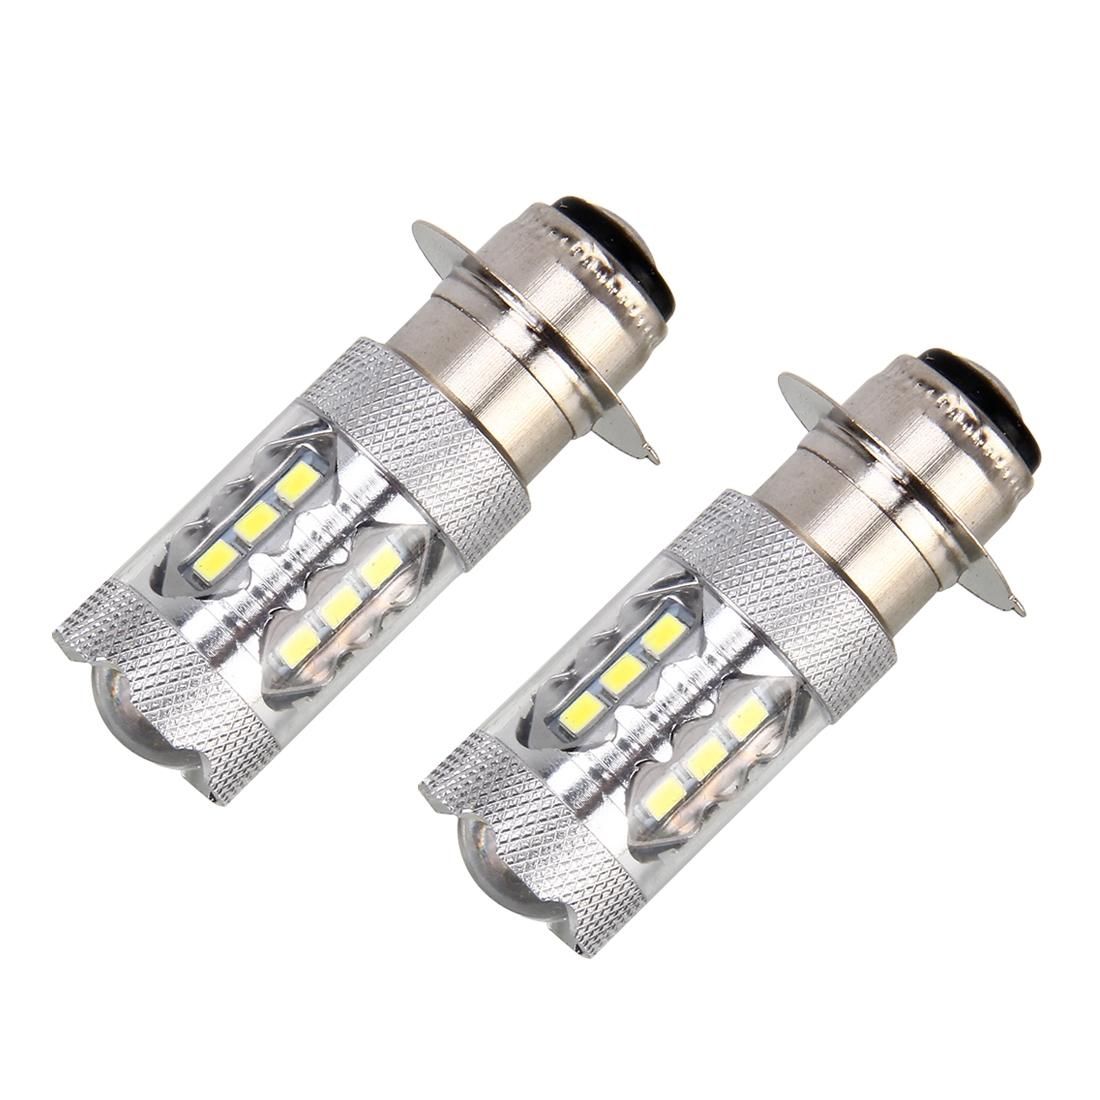 Motorcycle Headlights 250LM 6000K White H6M/PX15D 5W 16LEDs SMD-2835 Lamps, DC 12V